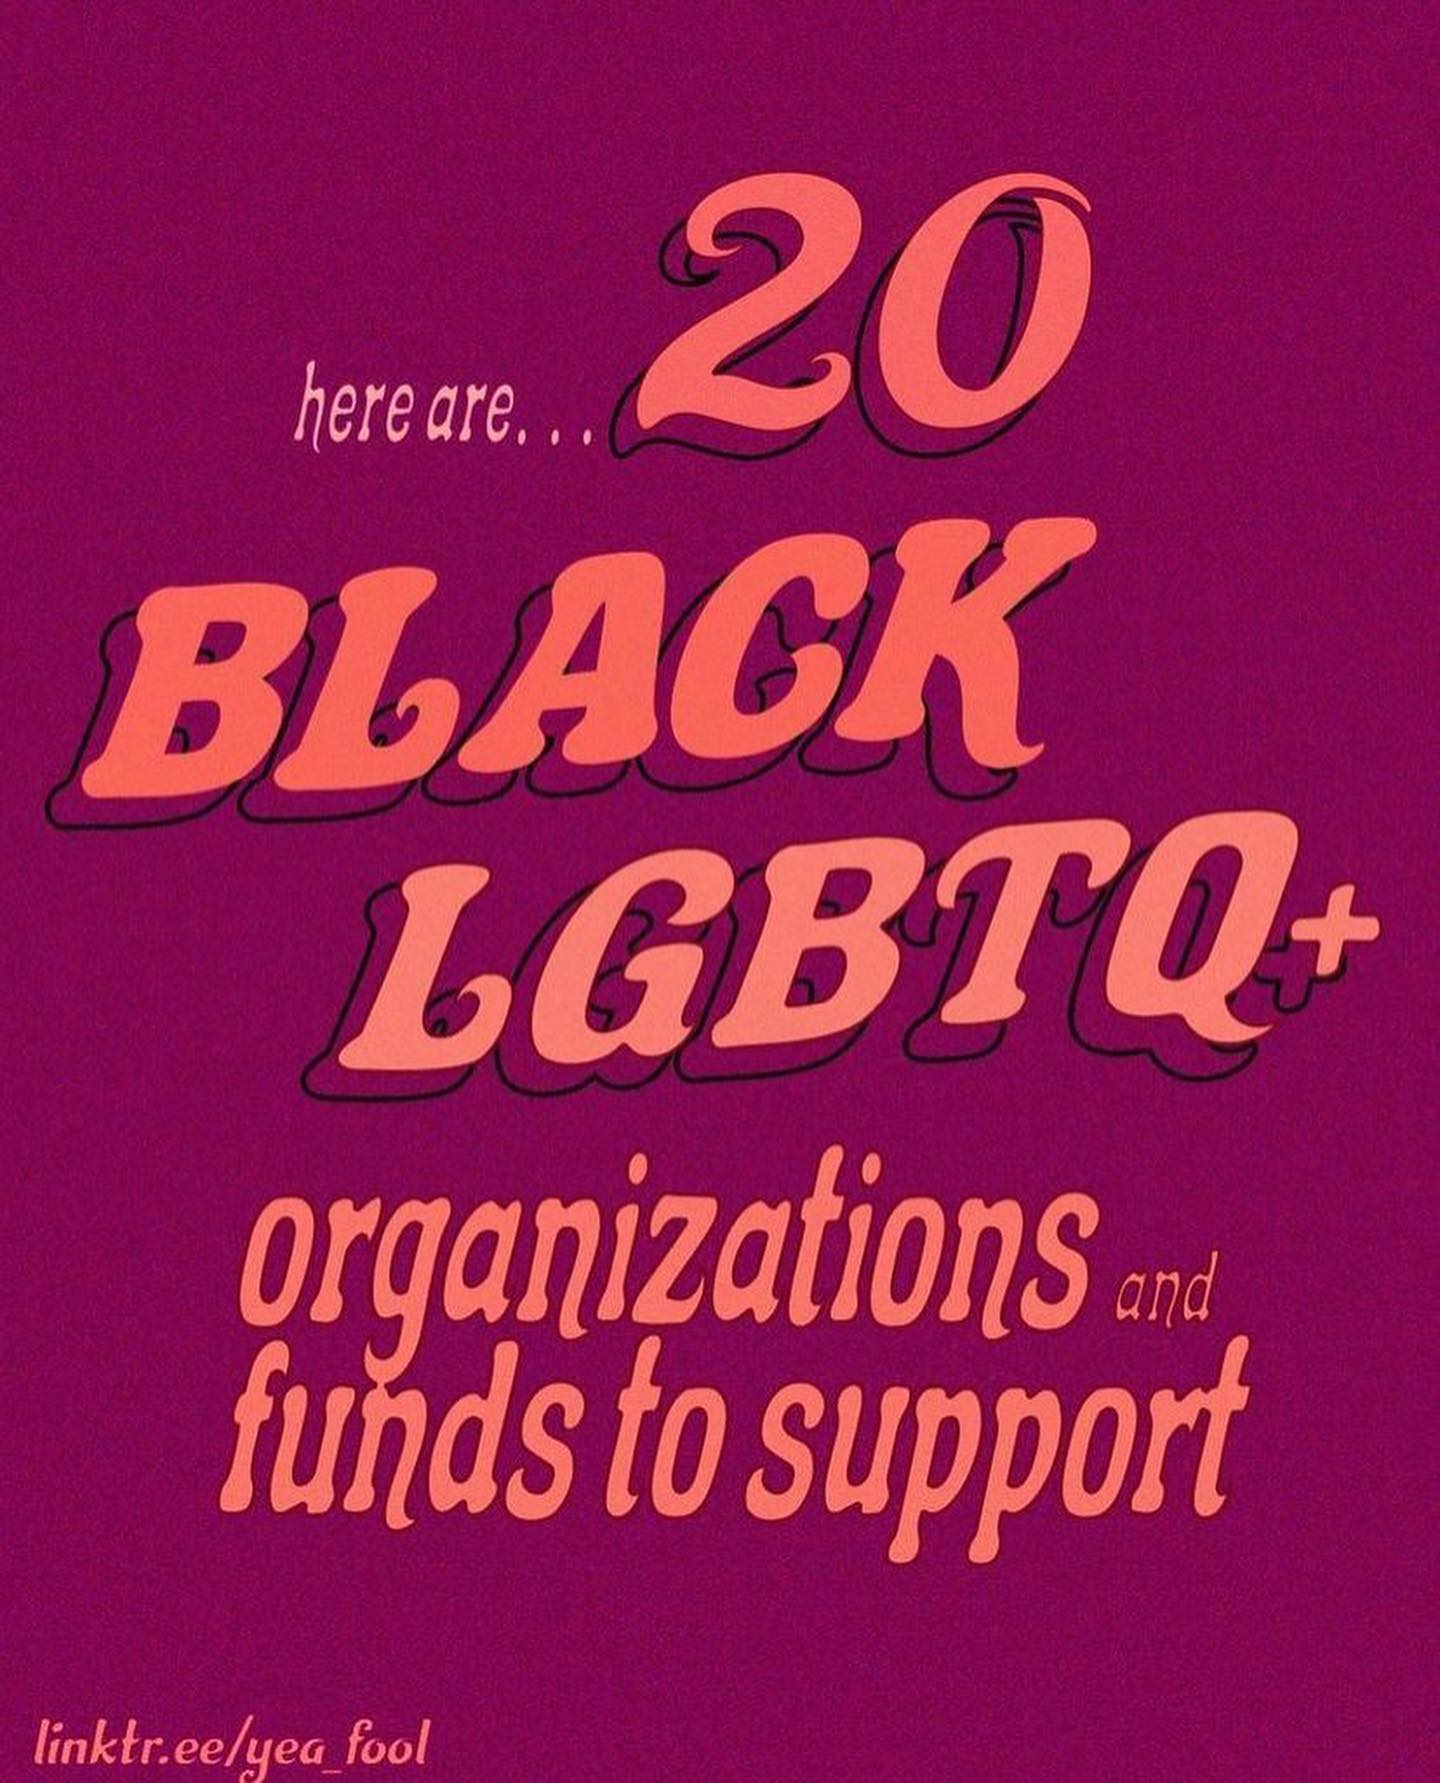 Sharing this list of 20 Black LGBTQ+ organizations and funds to support 🏳️‍🌈 🏳️‍⚧️ curated by @yea_fool 